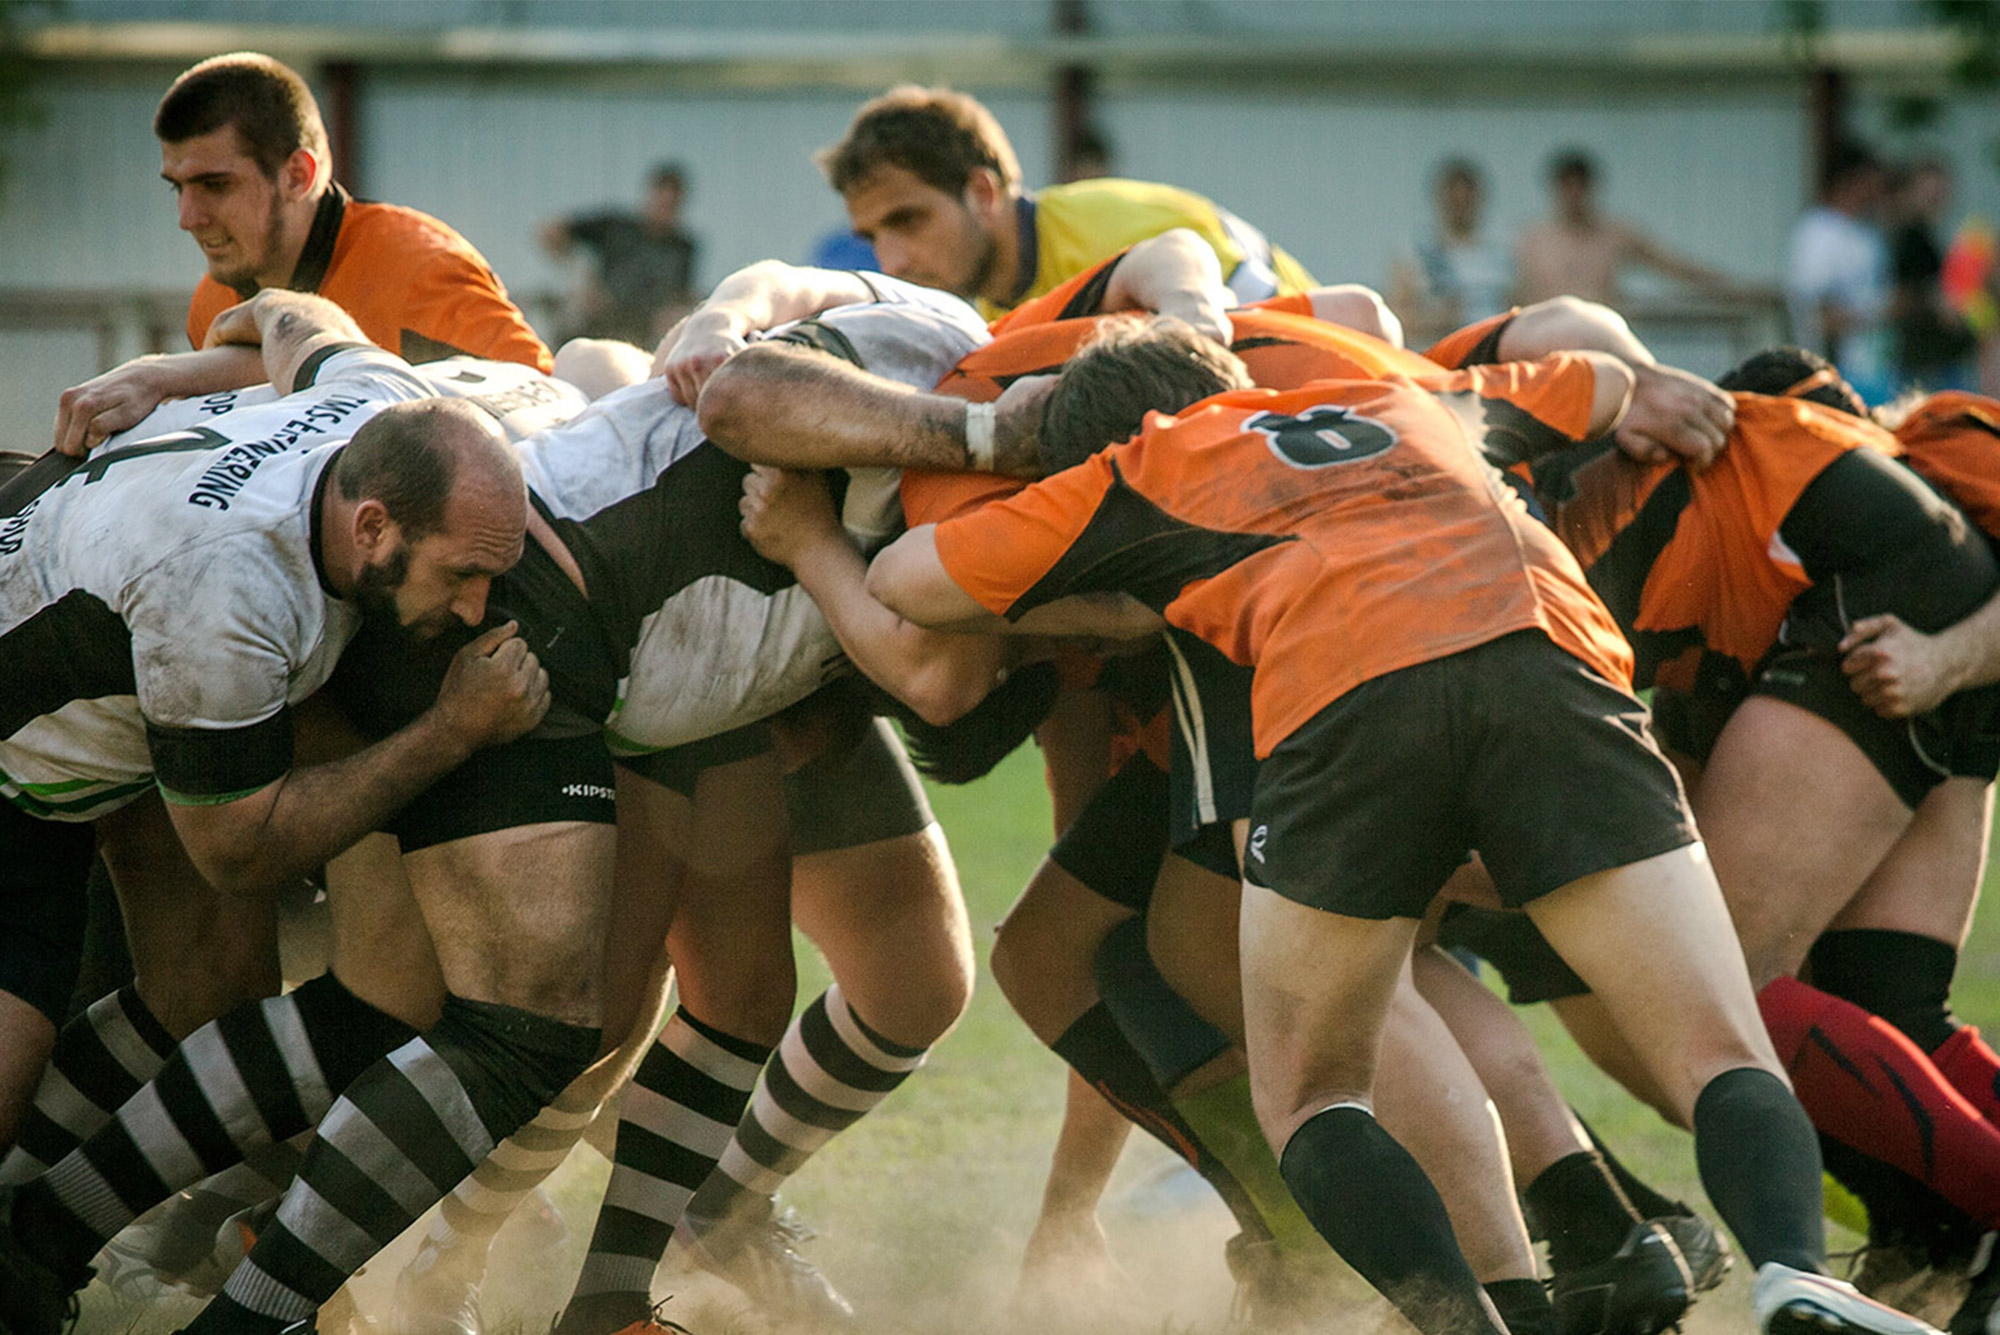 Rokt Calendar delivers 480K subscribers during Rugby World Cup